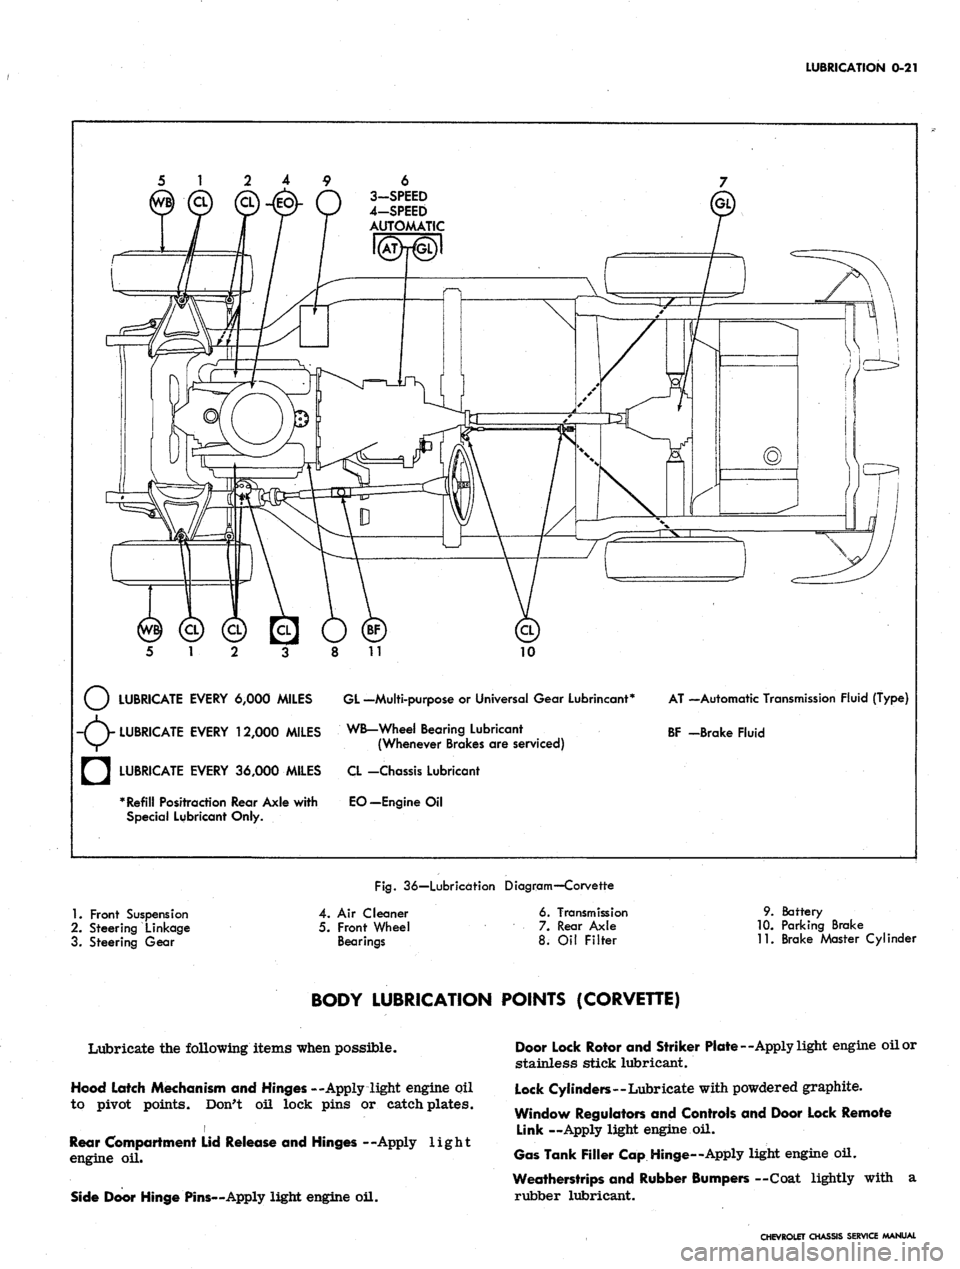 CHEVROLET CAMARO 1967 1.G Chassis Workshop Manual 
LUBRICATION
 0-21

6

3-SPEED

4-SPEED

AUTOMATIC

10

LUBRICATE EVERY 6,000 MILES GL -Multi-purpose
 or
 Universal Gear Lubrincant*

-(V LUBRICATE EVERY 12,000 MILES WB-Wheel Bearing Lubricant

V/^ 